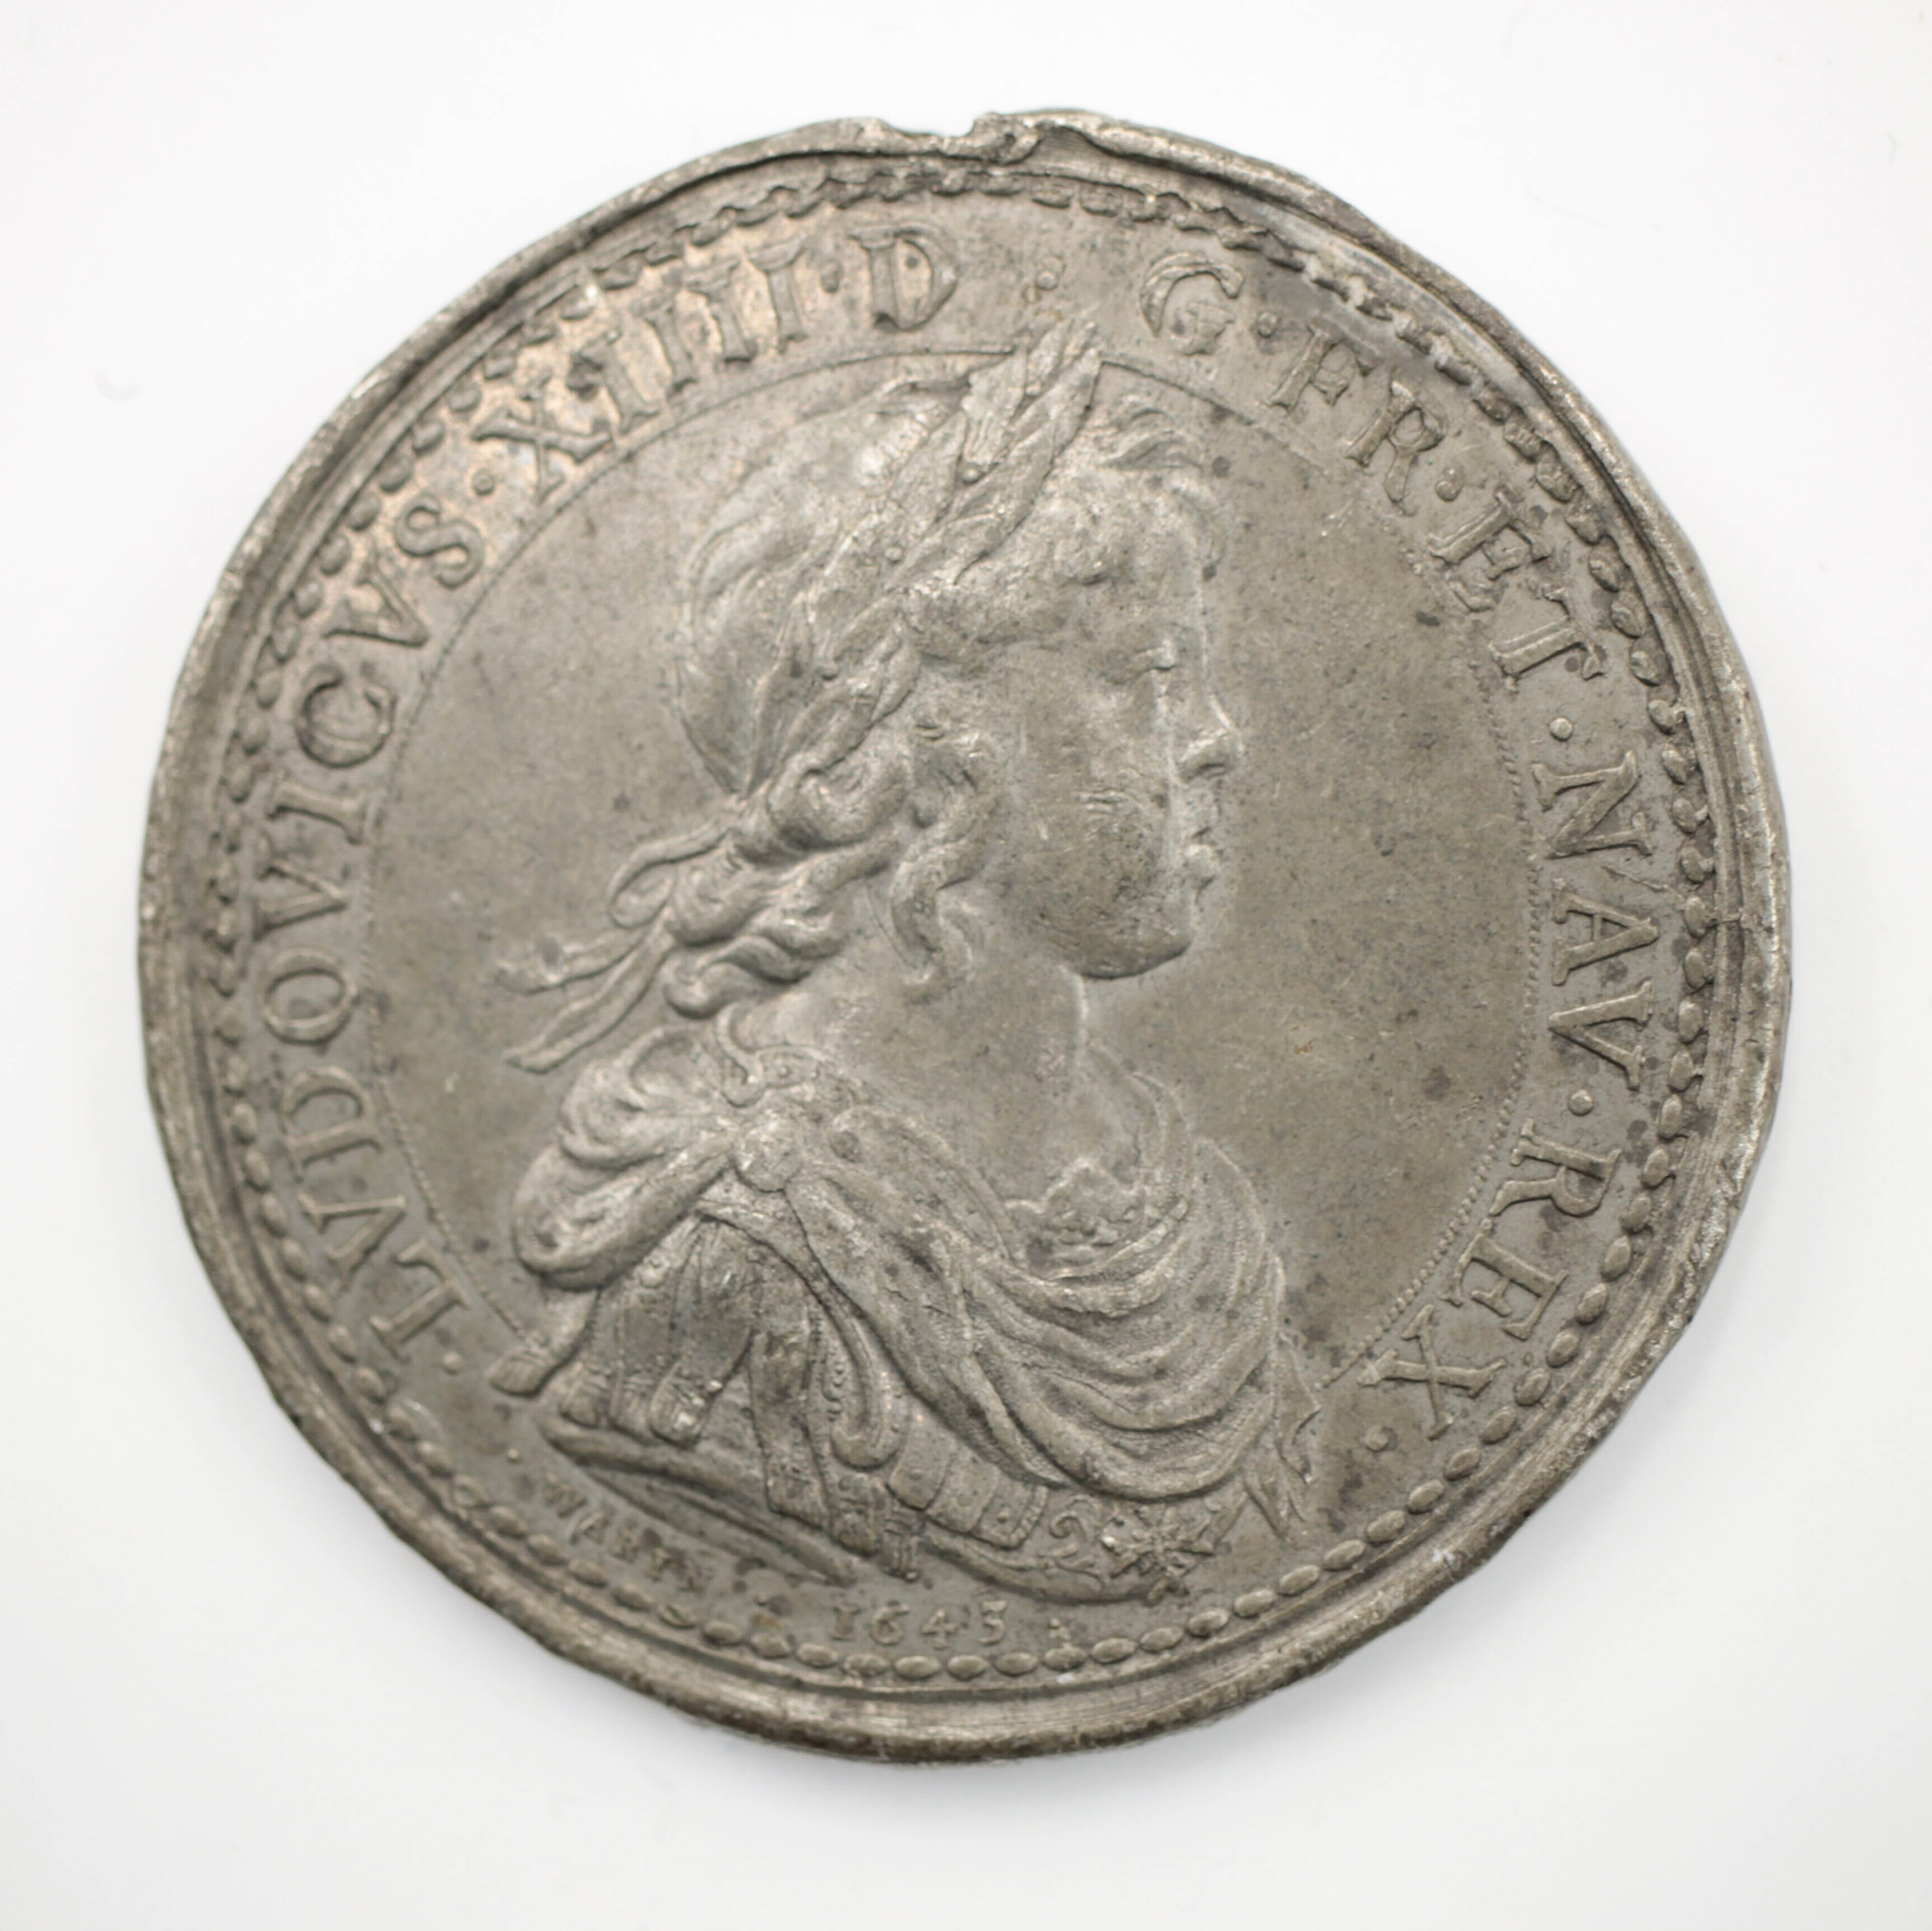 medal featuring profile of King Louis XIV